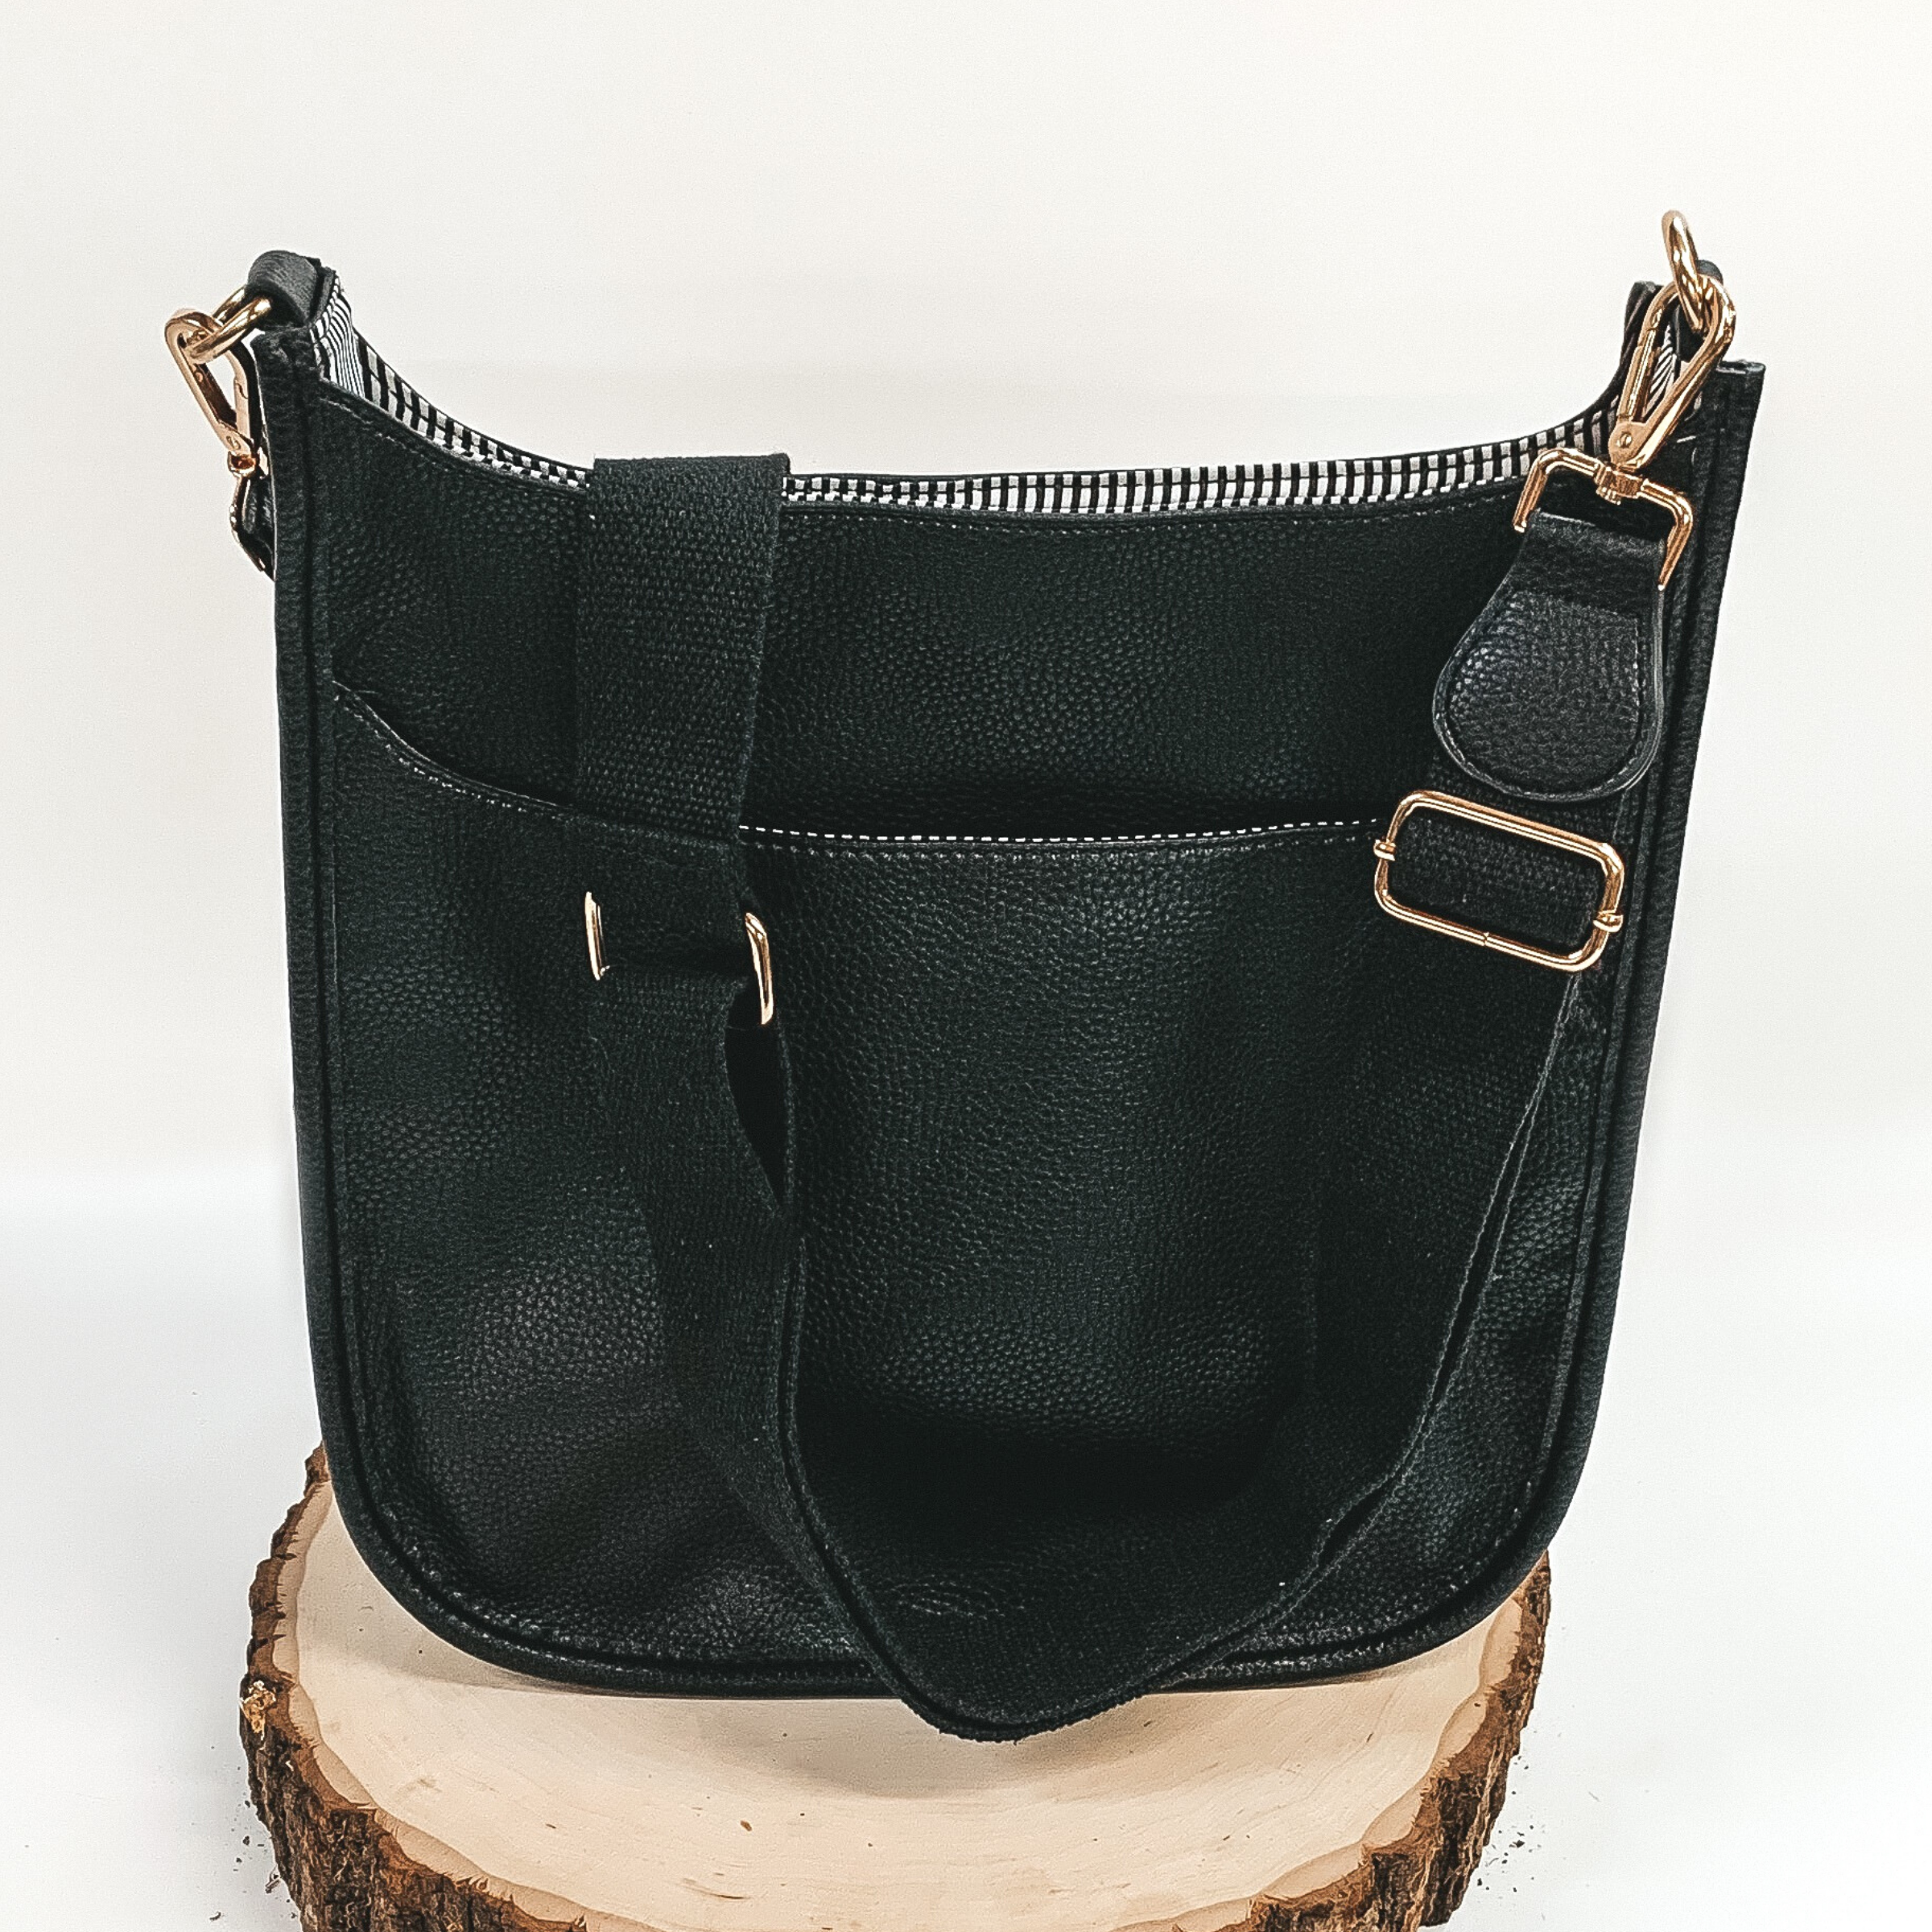 Crossbody Travel Purse in Black - Giddy Up Glamour Boutique